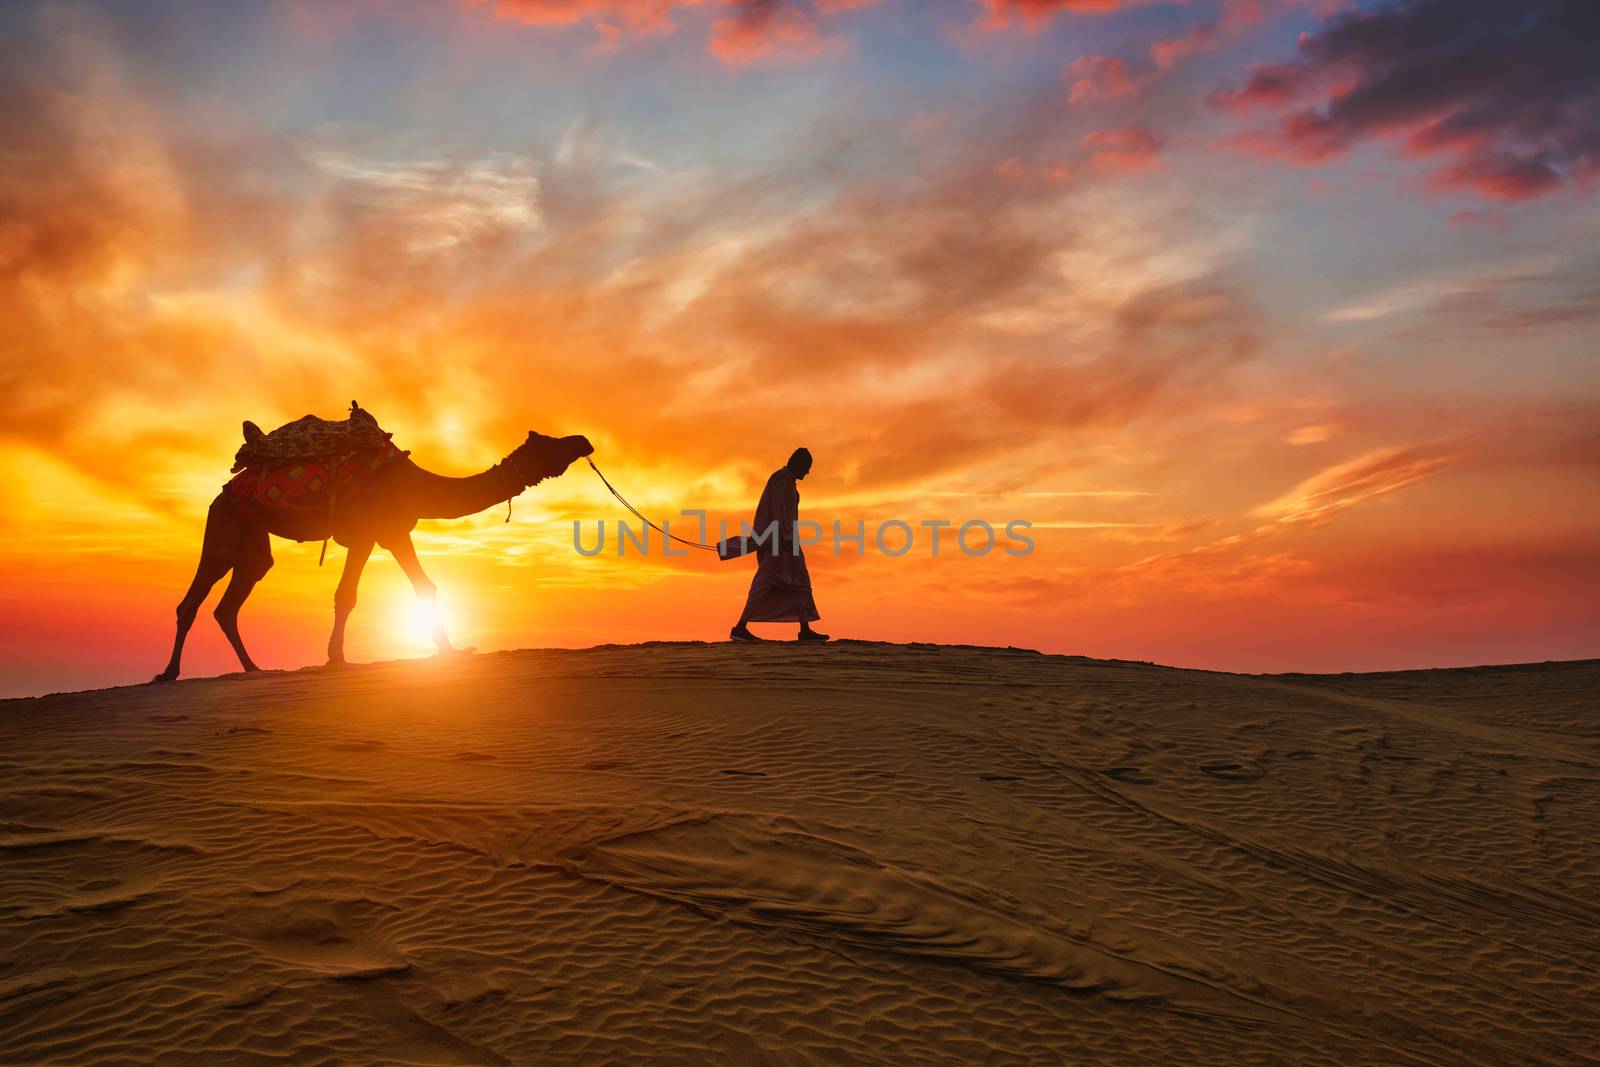 Indian cameleer camel driver with camel silhouettes in dunes on sunset. Jaisalmer, Rajasthan, India by dimol